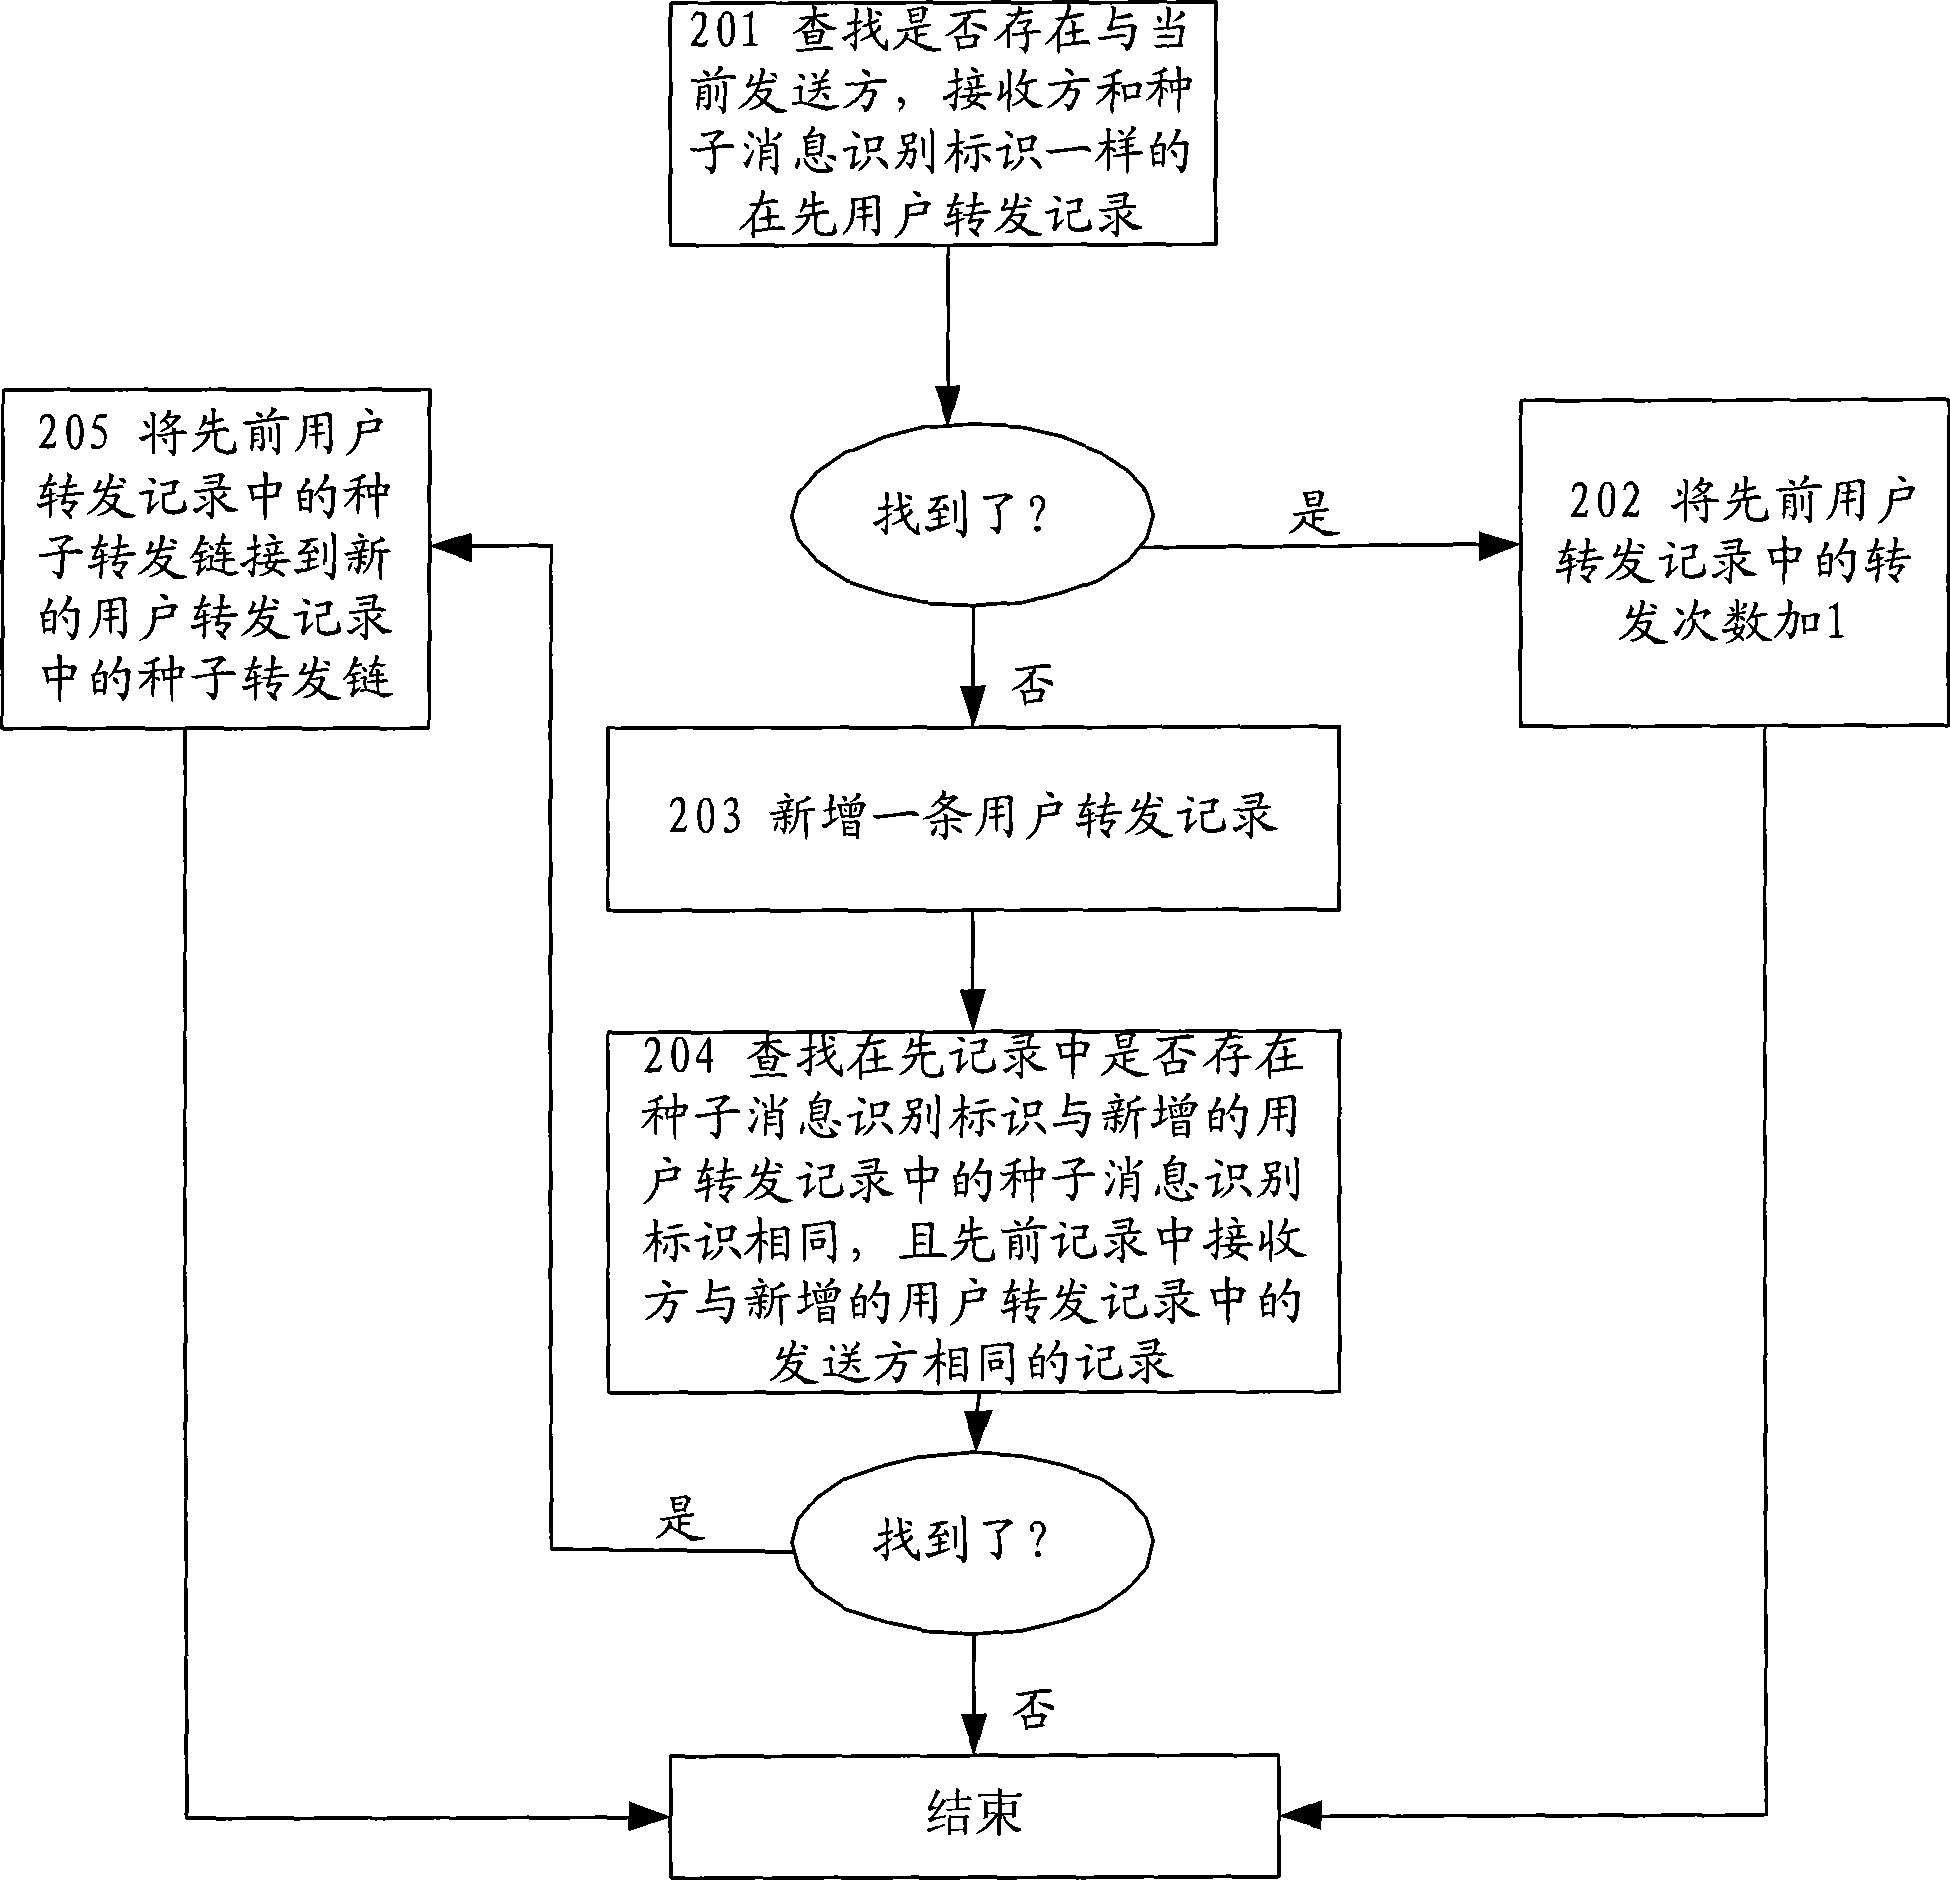 Message propagating method and system